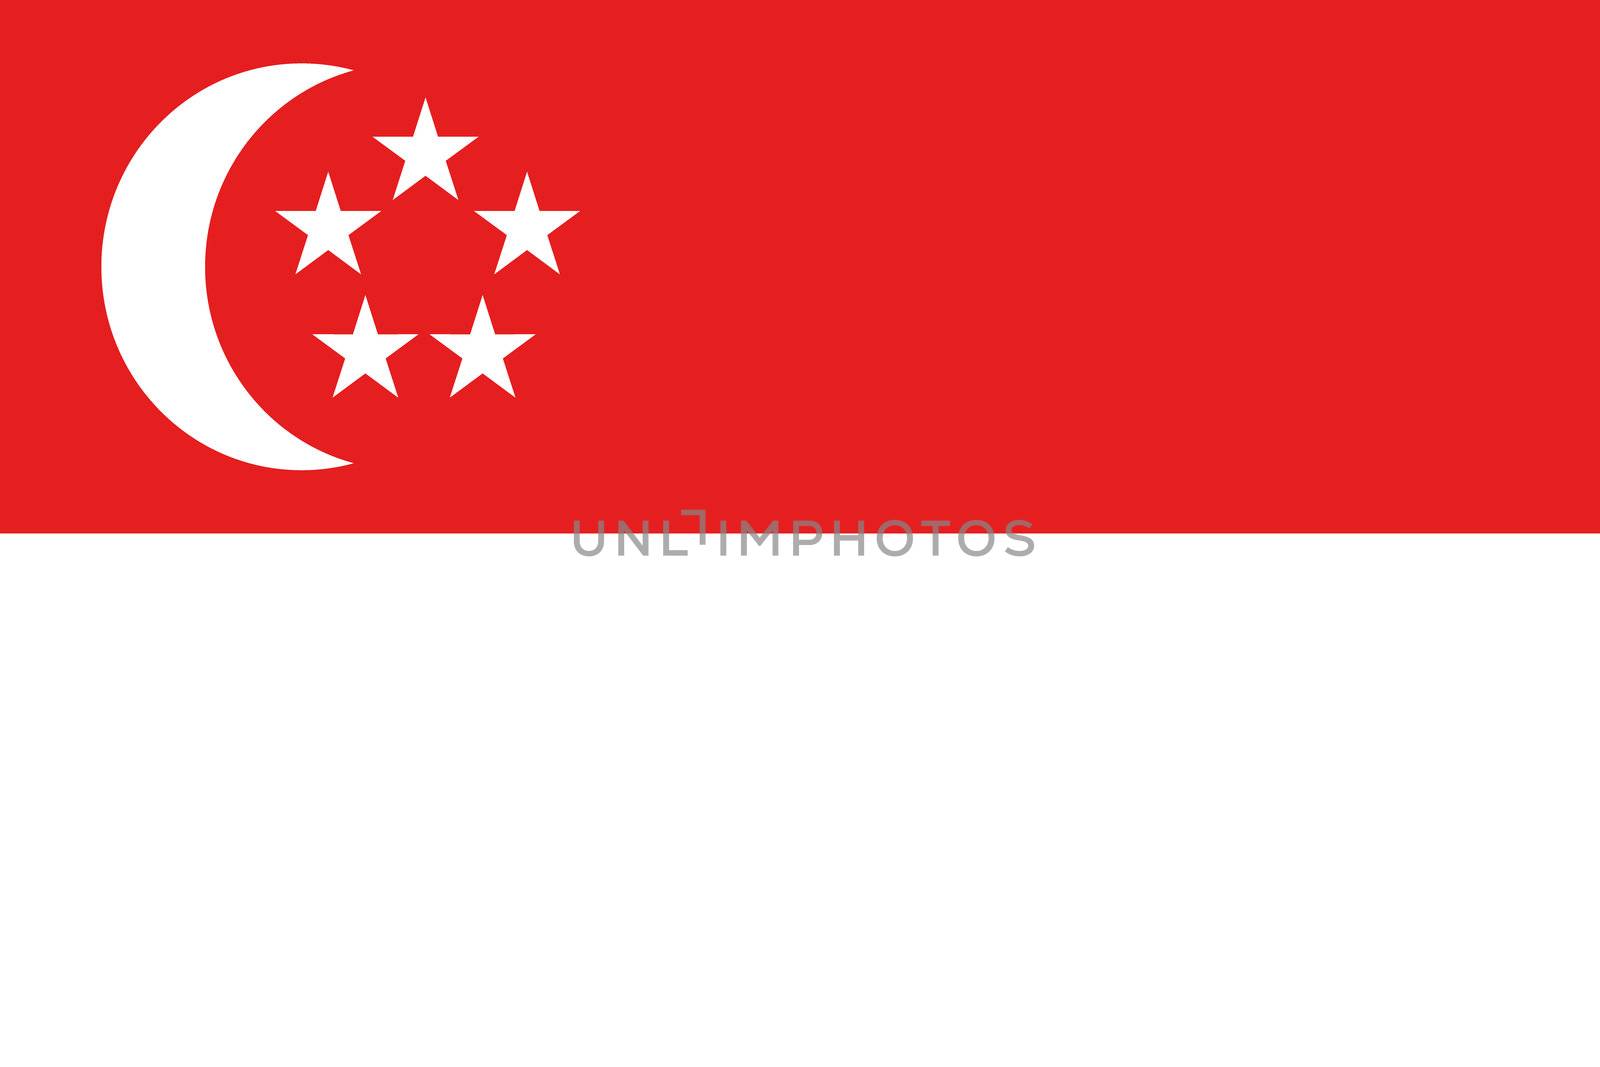 An illustration of the flag of Singapore